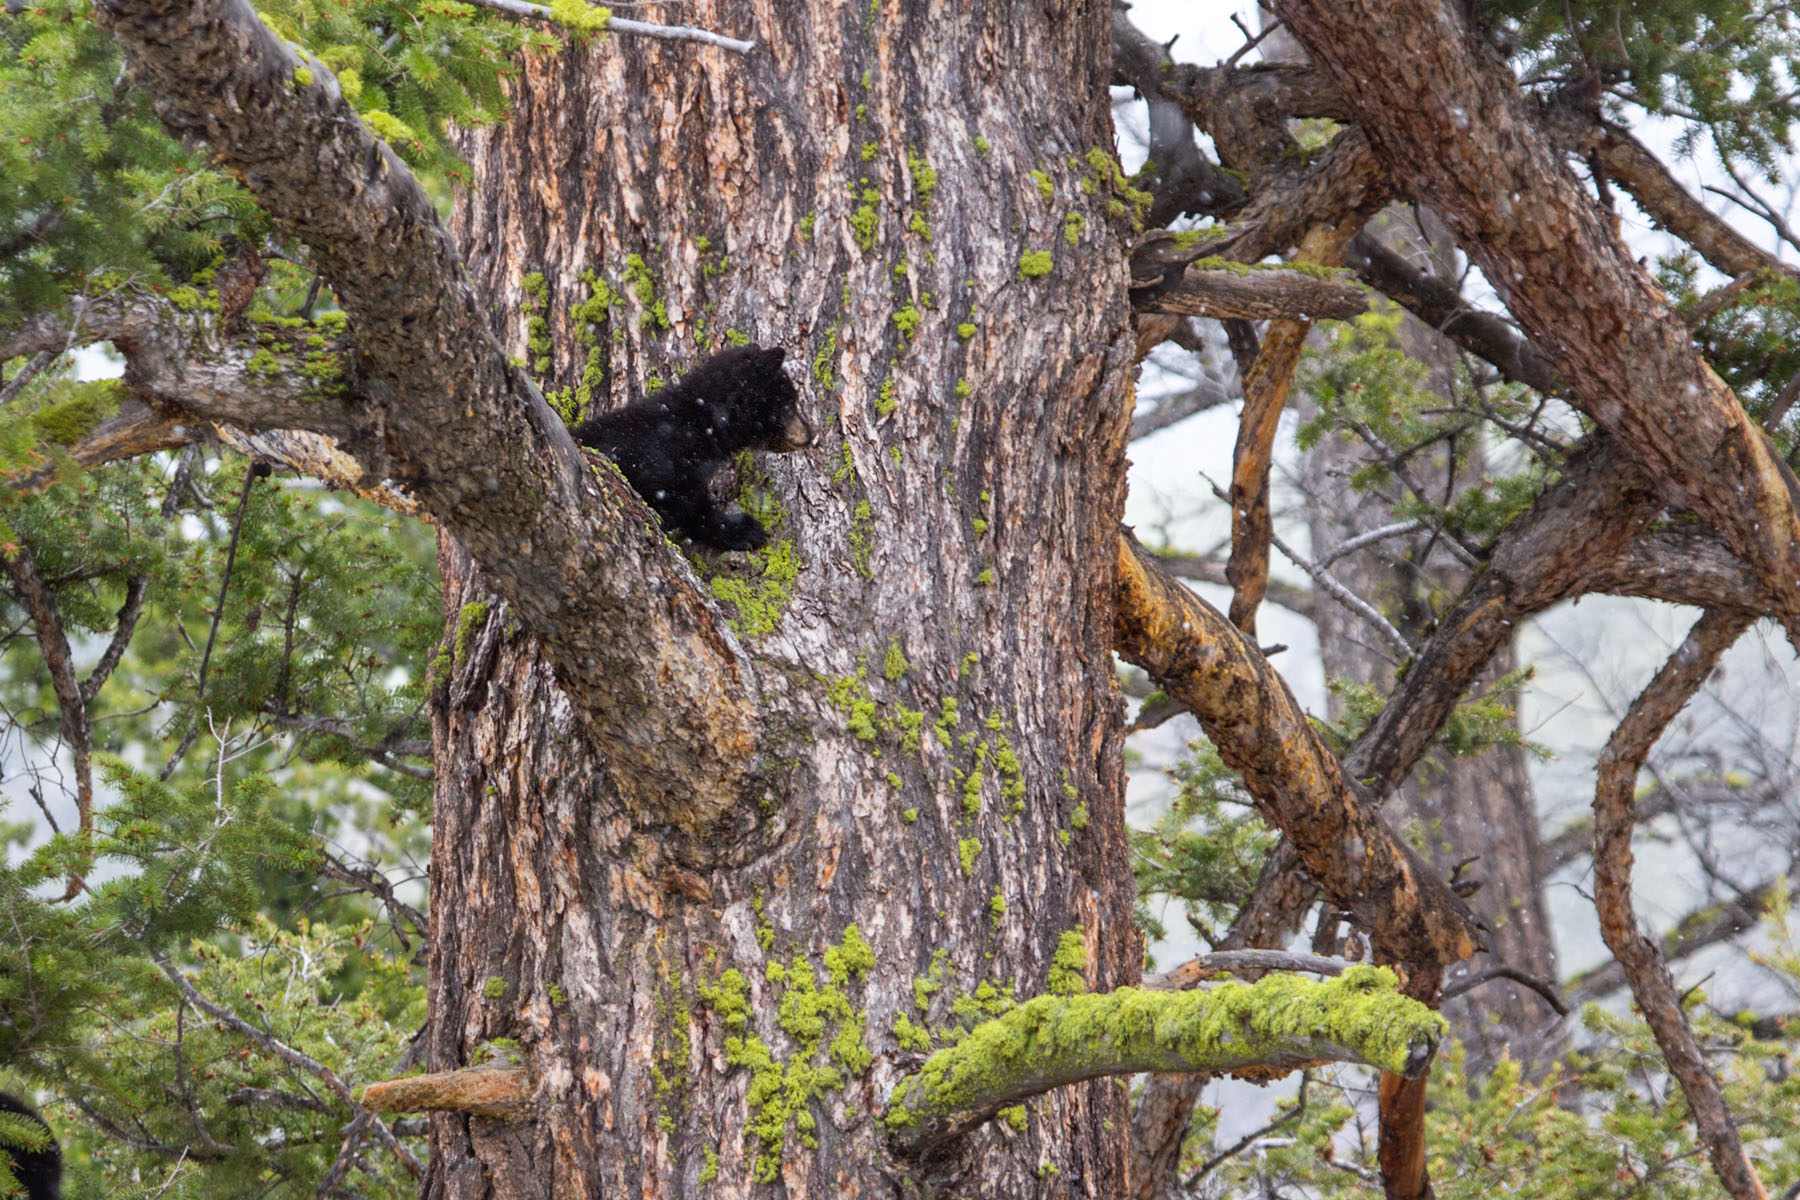 Black bear cub in a tree near Tower Falls, Yellowstone.  Click for next photo.